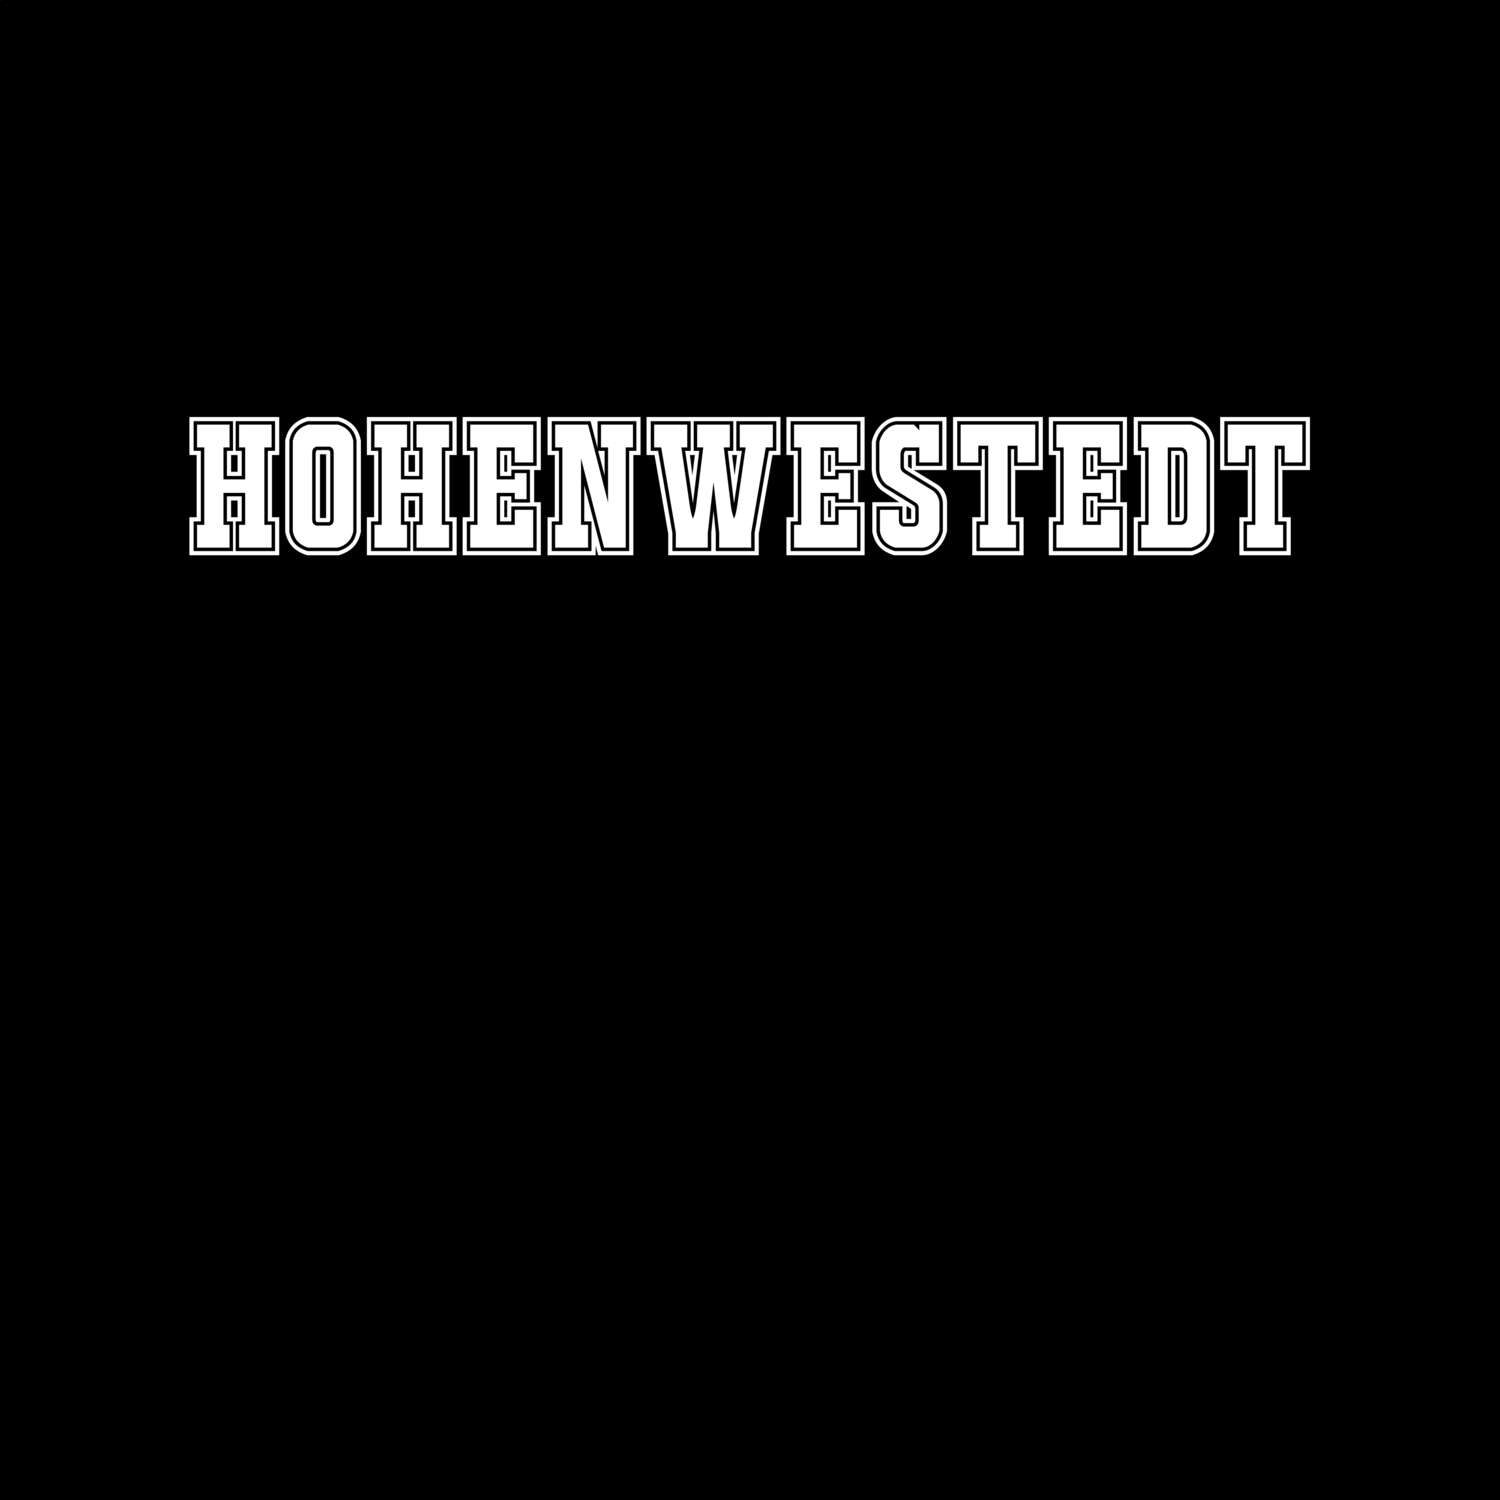 Hohenwestedt T-Shirt »Classic«